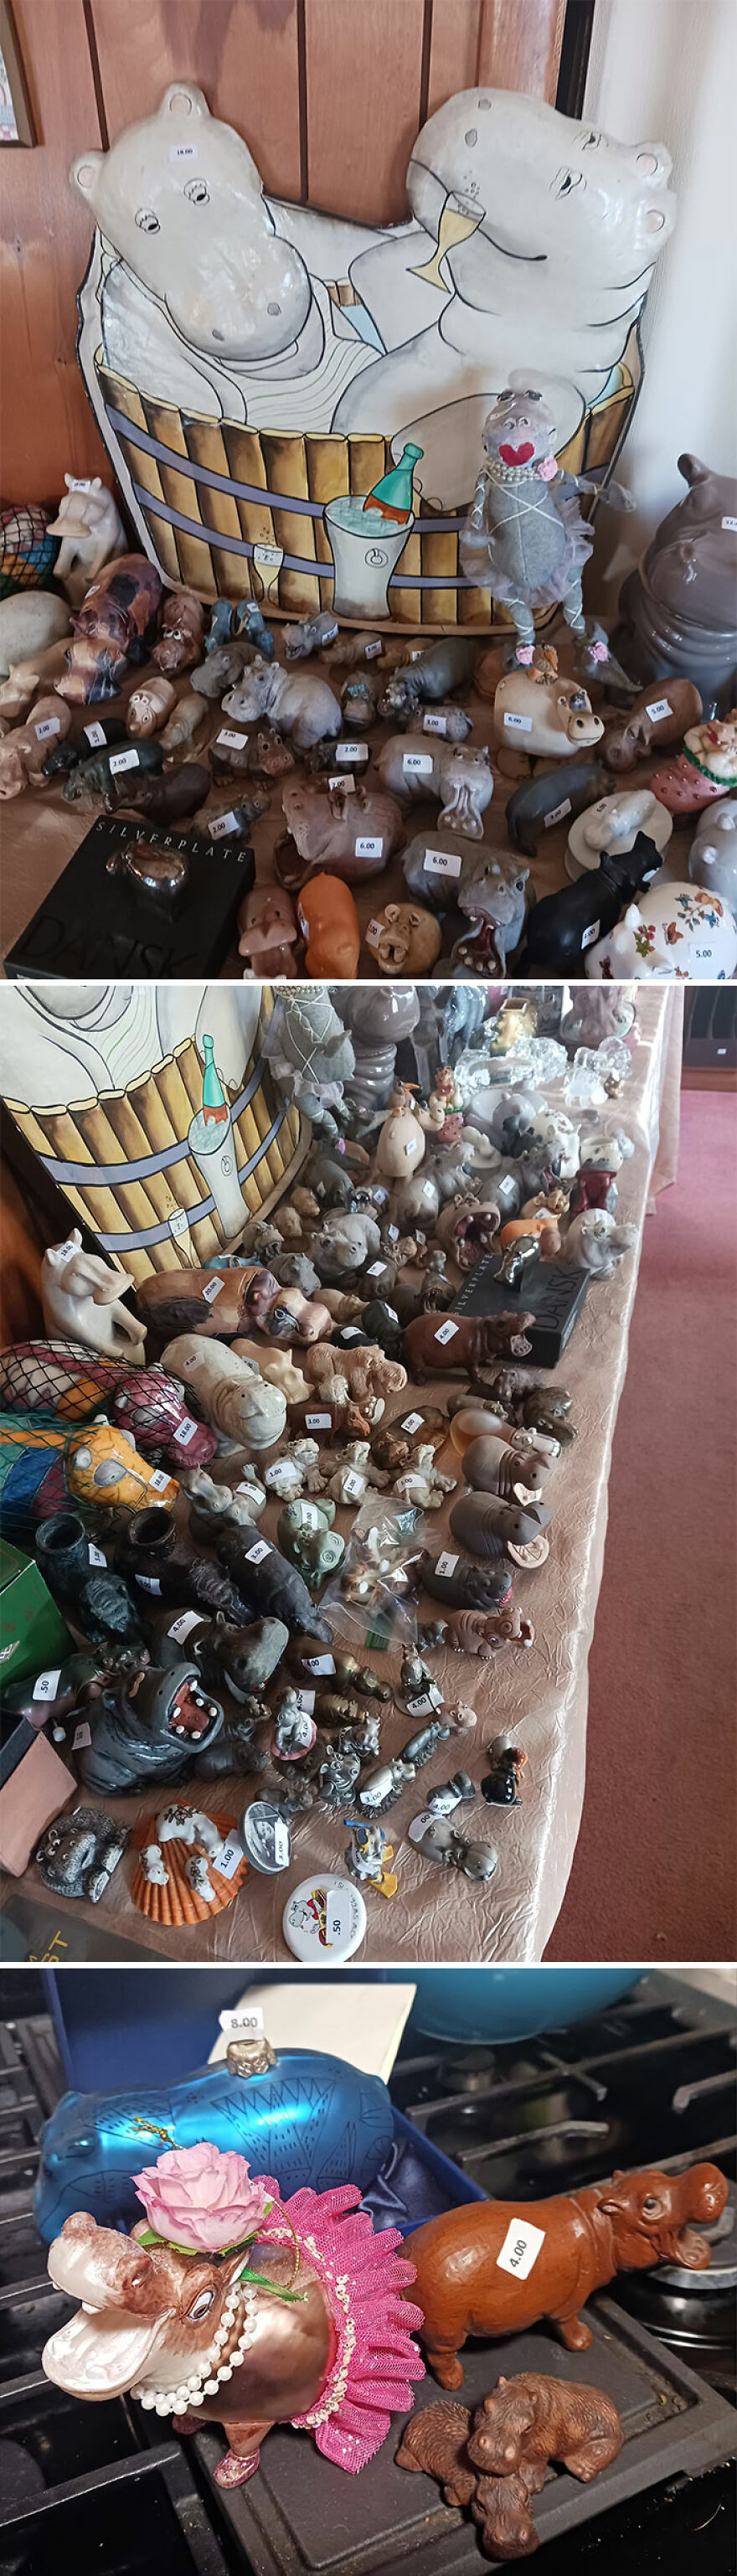 Holy House Hippos! Went To Estate Sale And What A Collection!